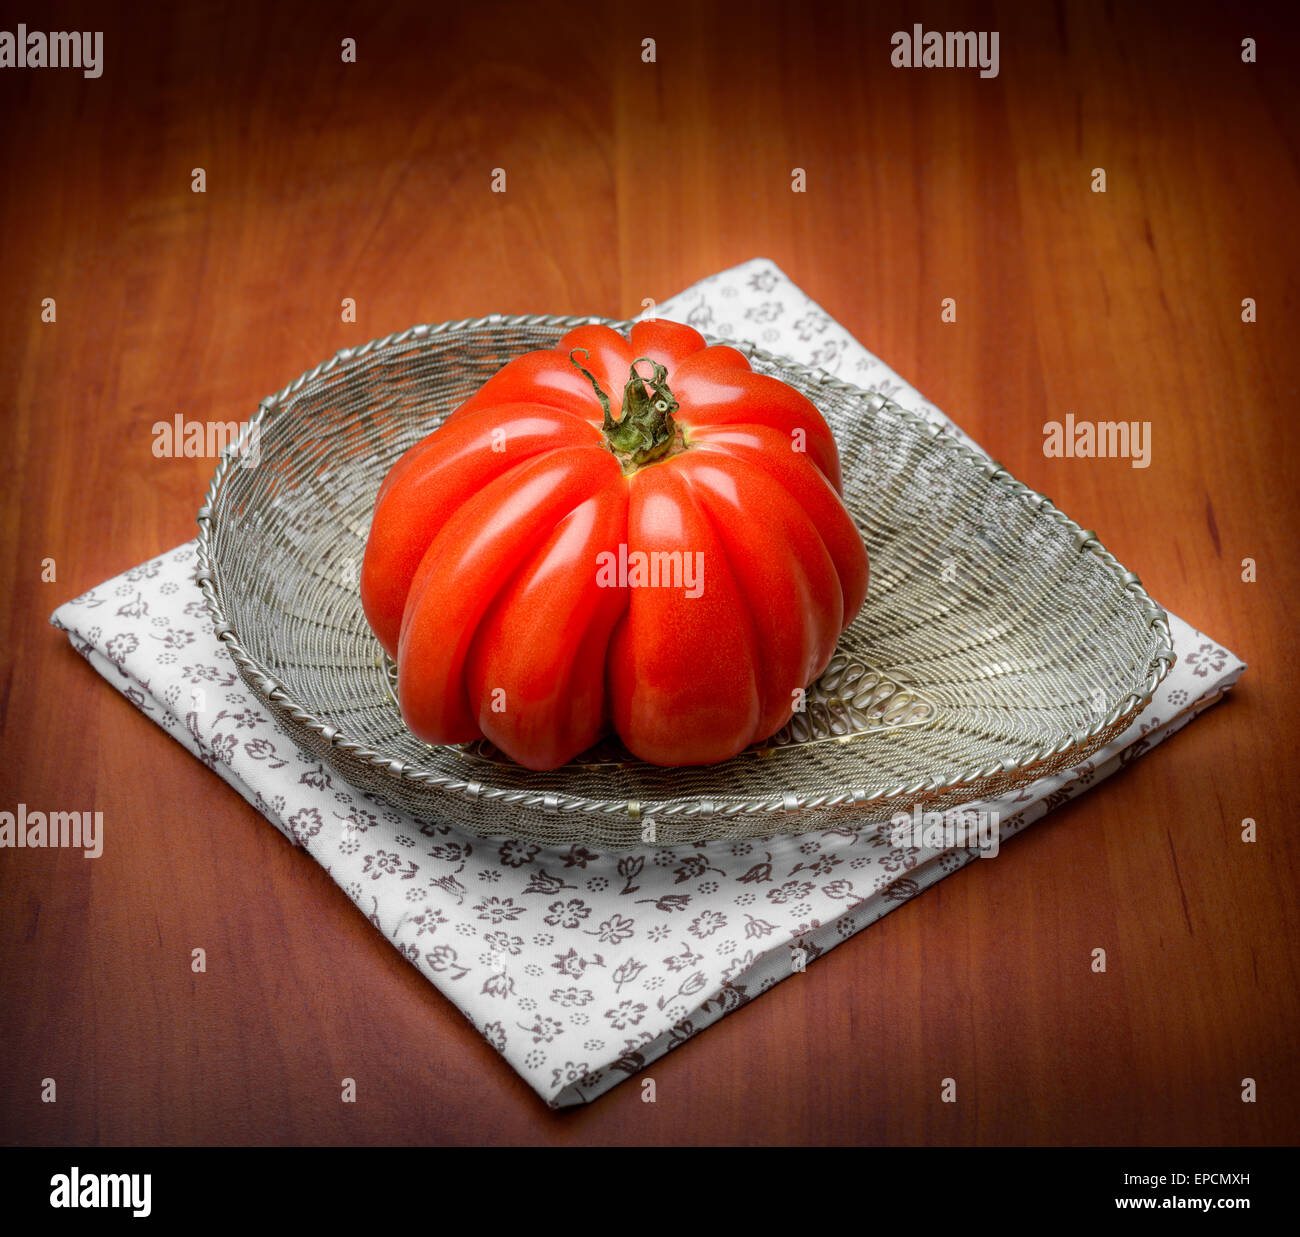 Nice Beef Heart tomato, Olena Ukraina, shown in a silver filigree basket, like a gem from nature Stock Photo